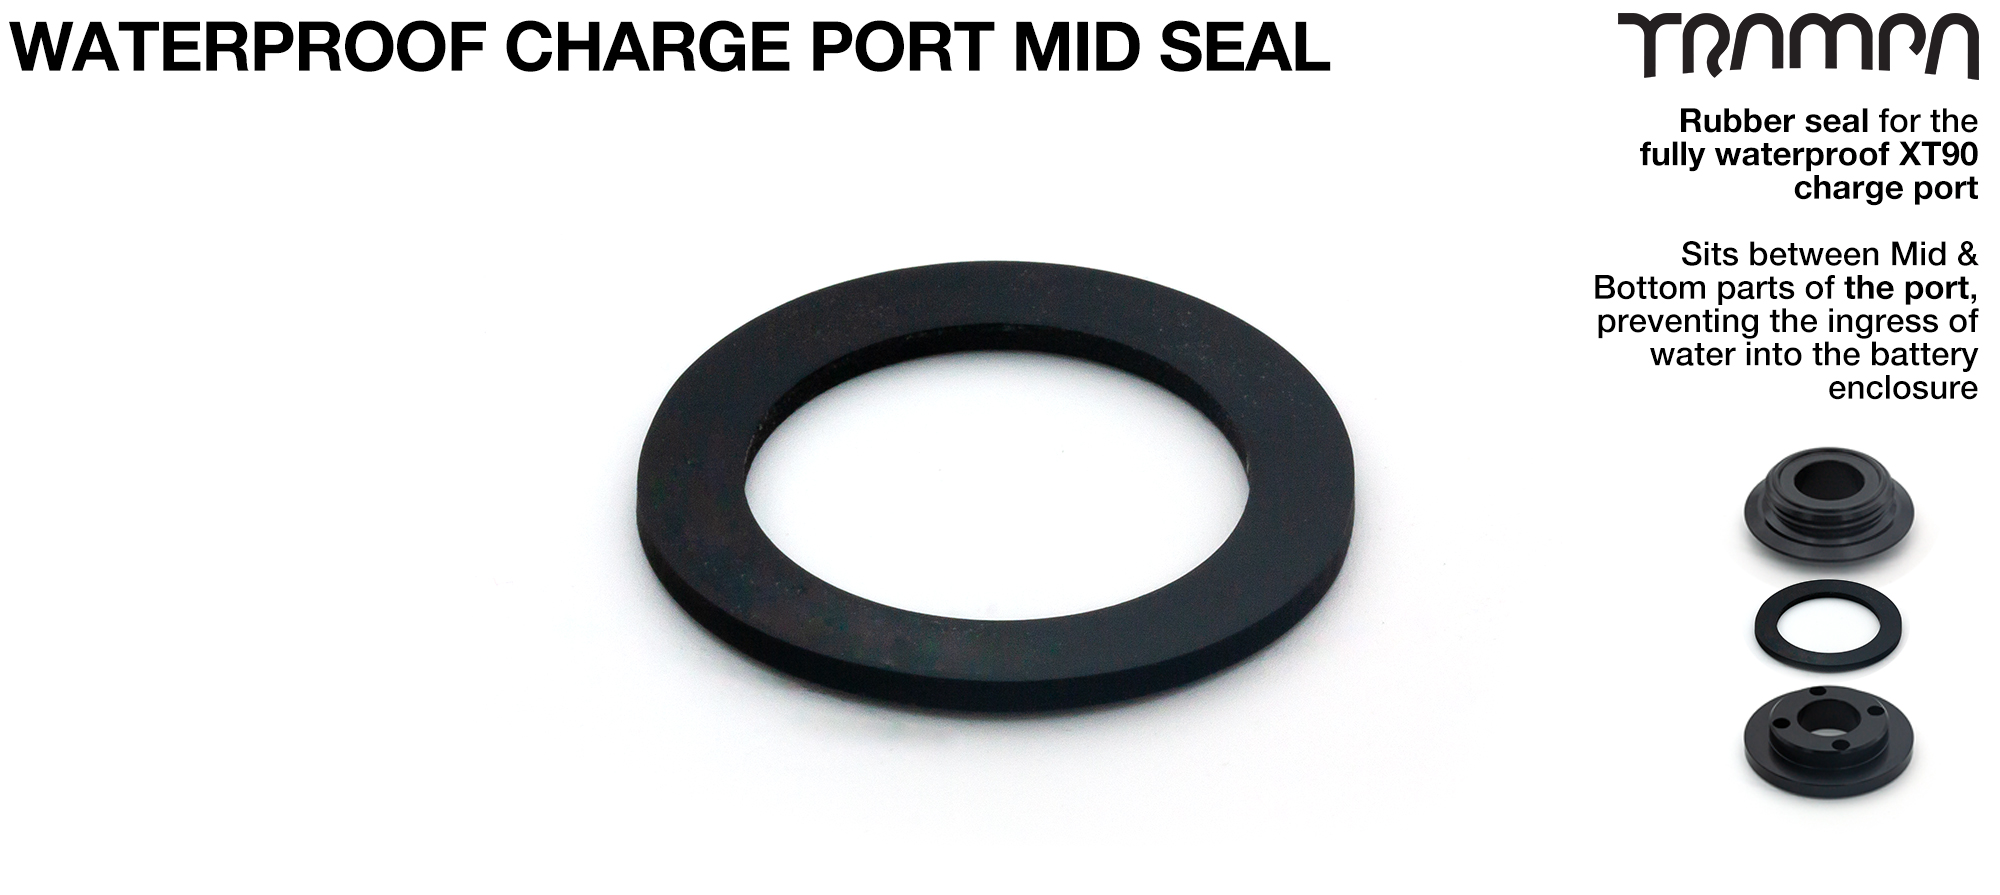 ORRSOM GT Charge Port MIDDLE Flat Water Proofing SEAL NBR Rubber 21x 30x 1.5mm